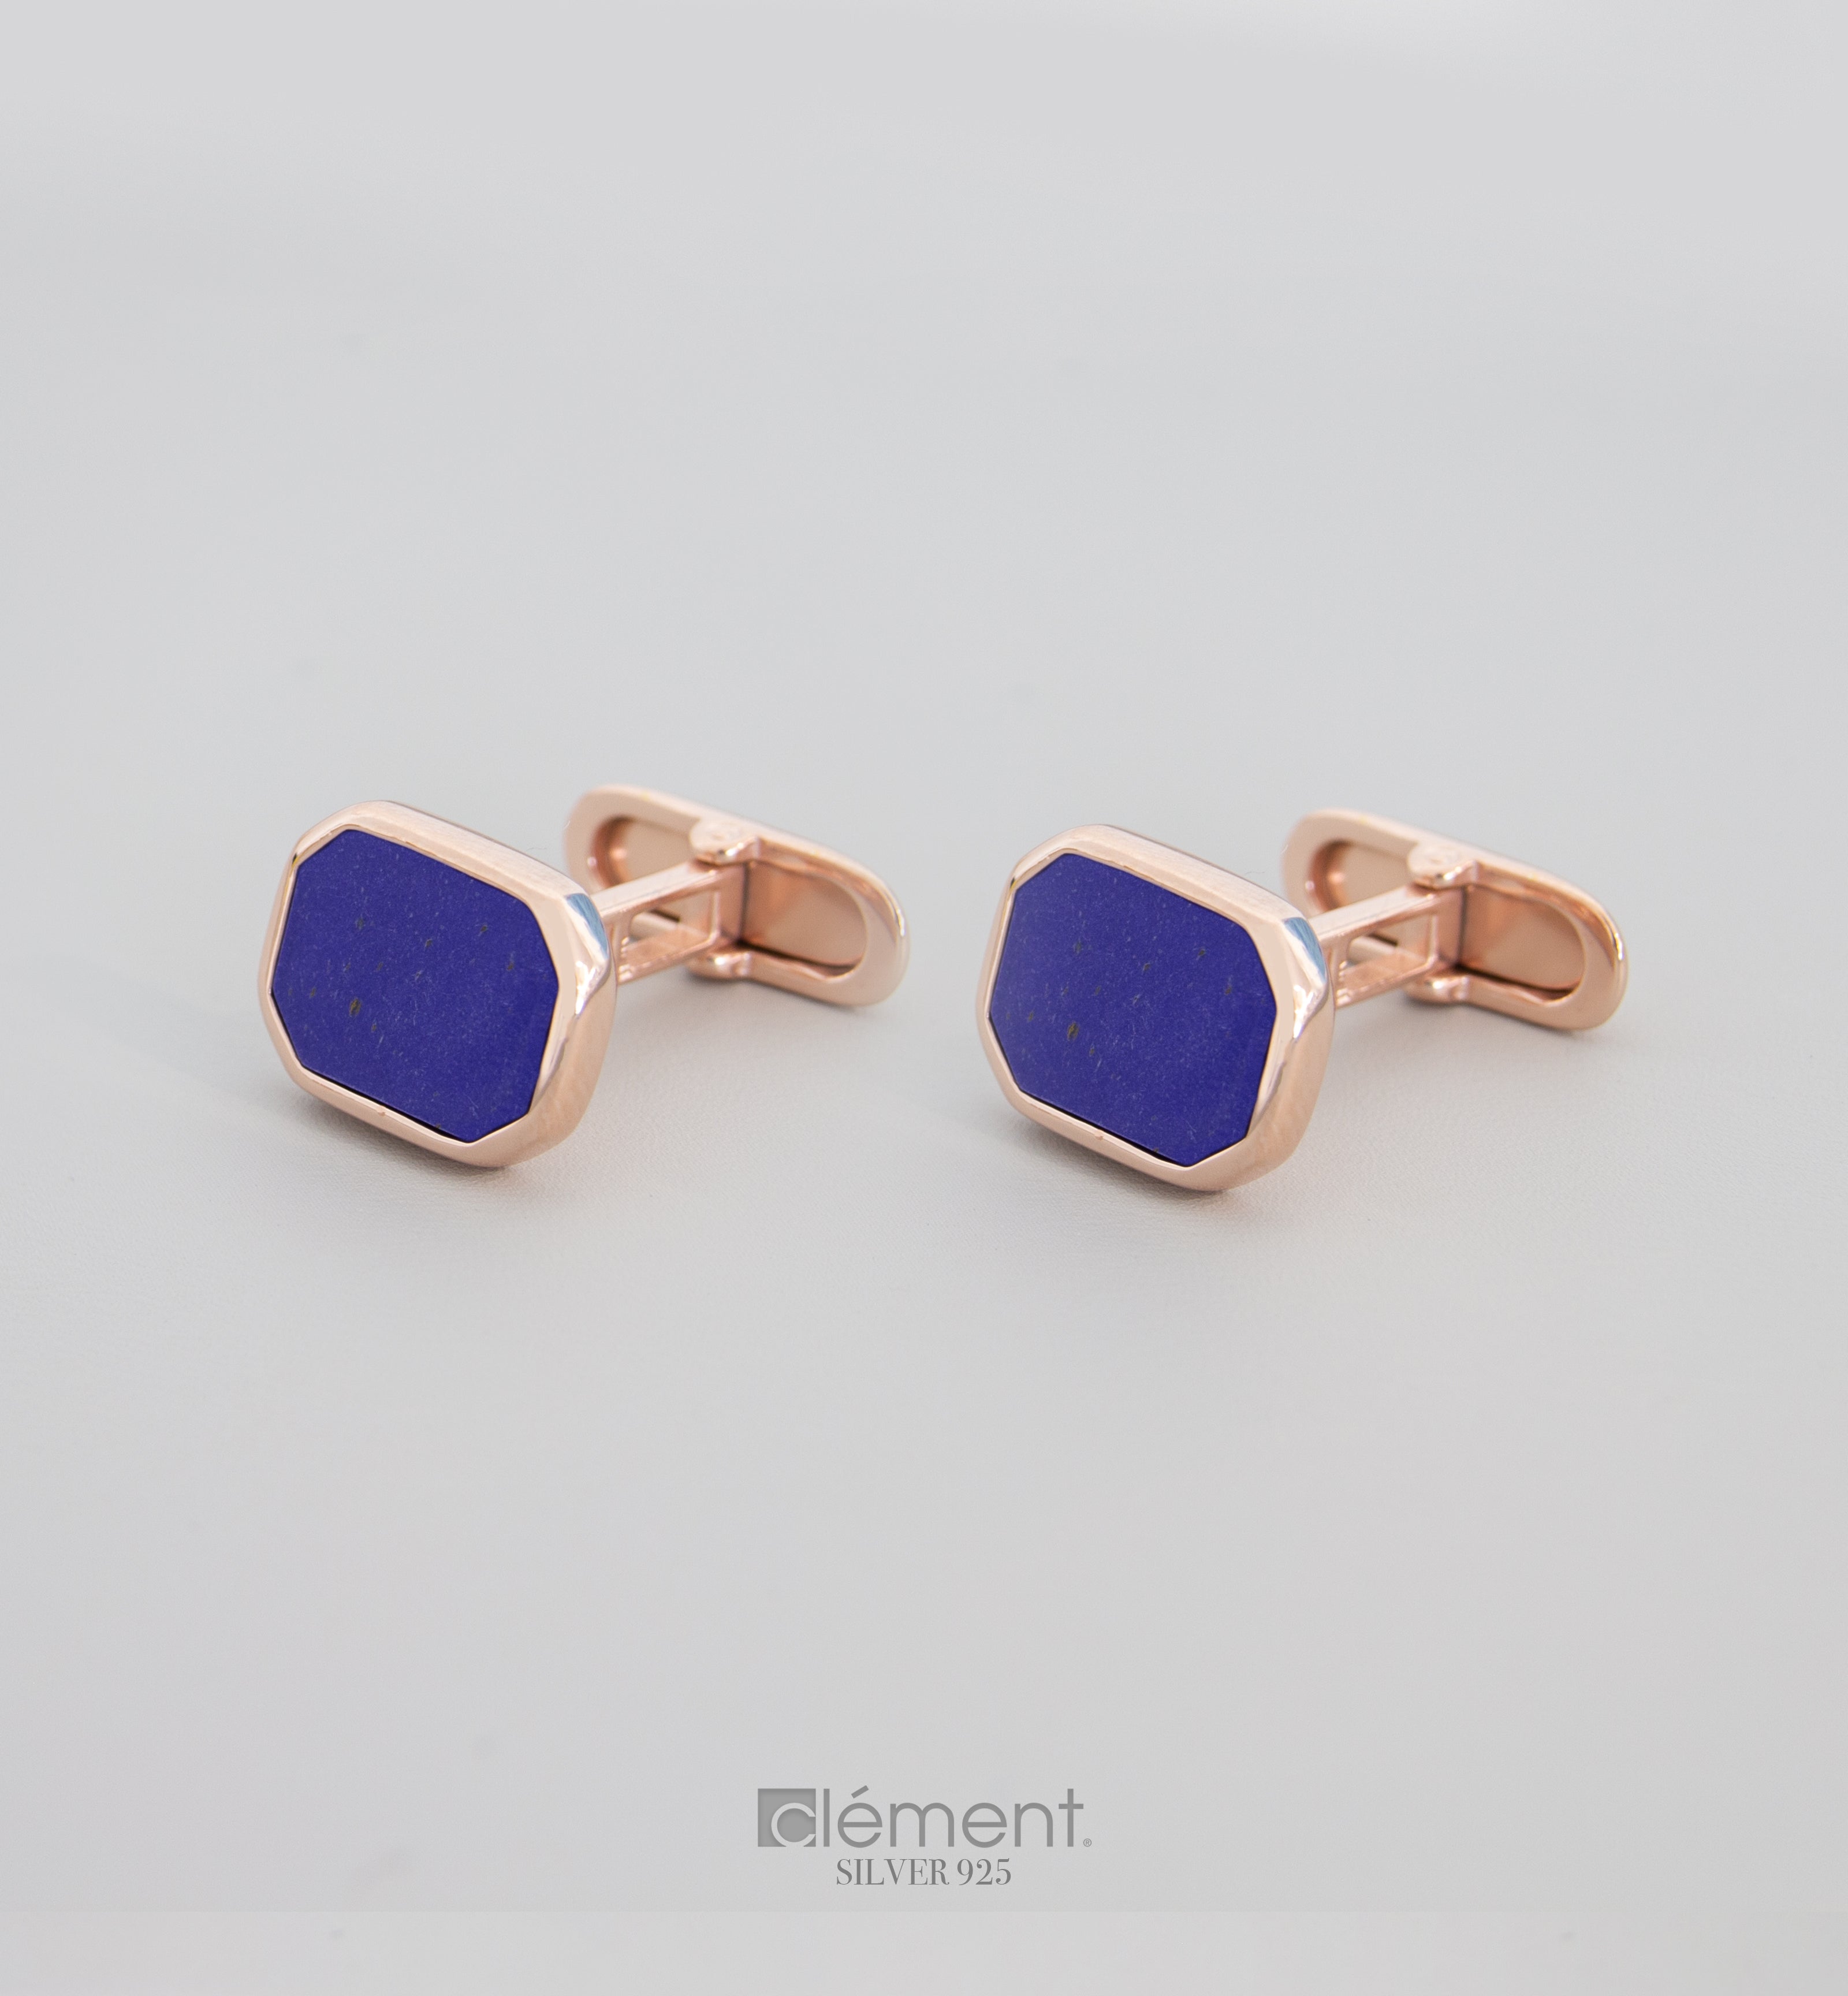 Silver 925 Rose Gold Plated Rectangle Cufflinks